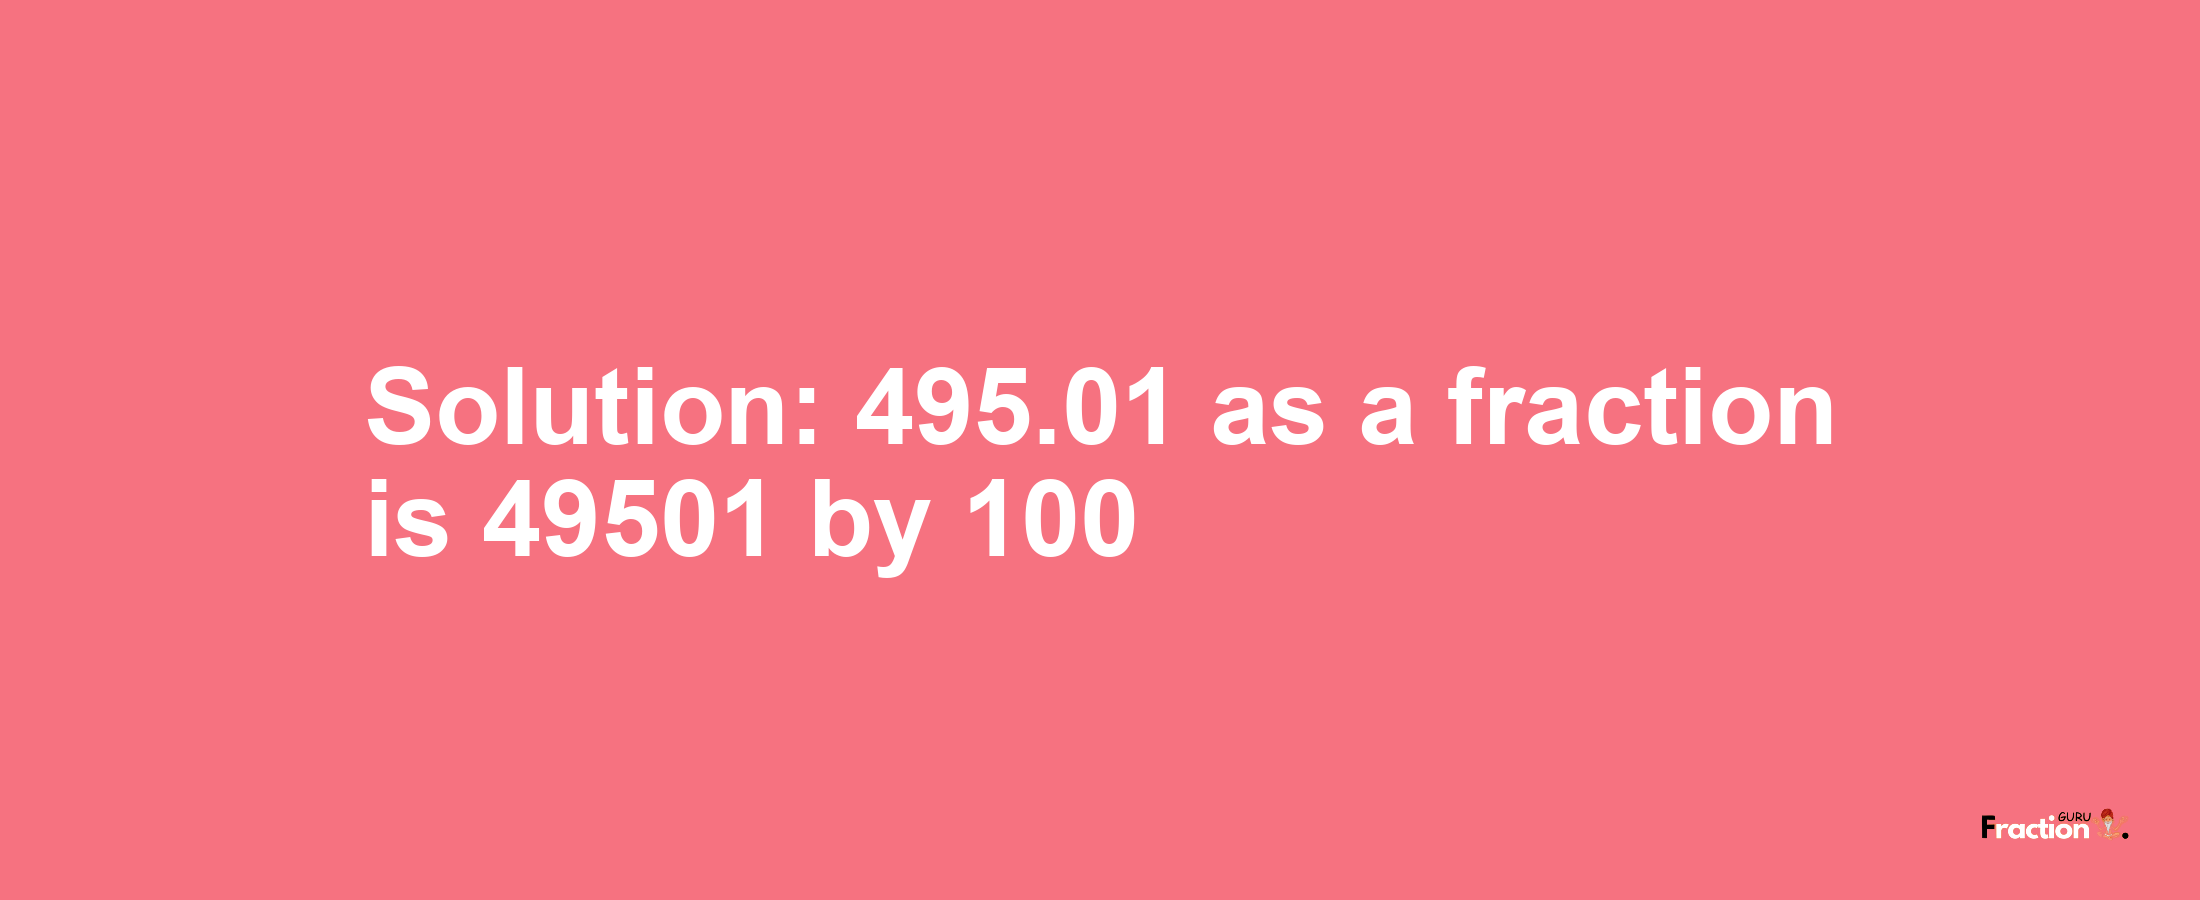 Solution:495.01 as a fraction is 49501/100